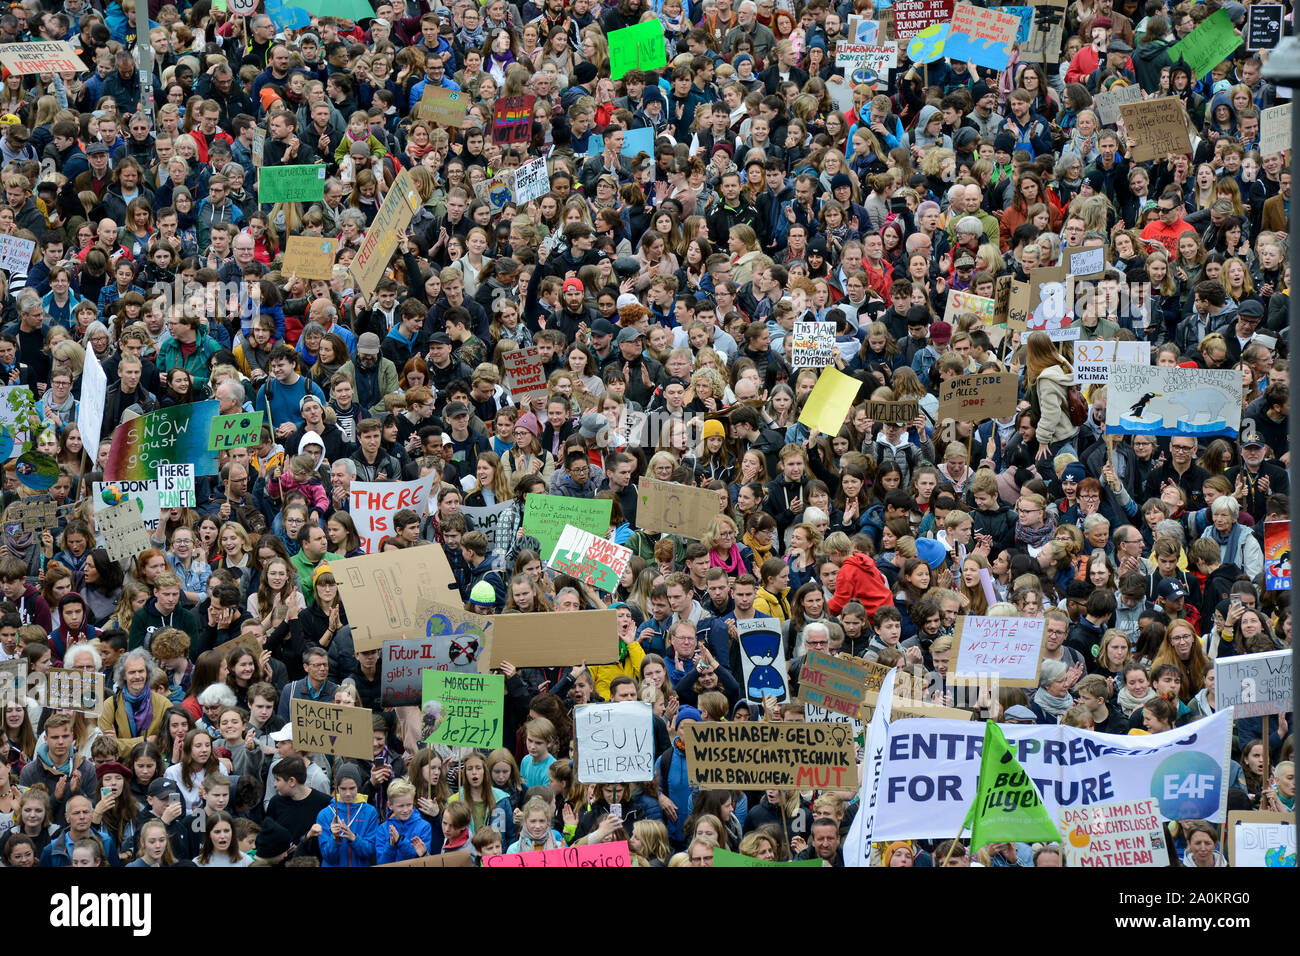 GERMANY, Hamburg city, Fridays for future, climate movement of pupils for climate protection and environment protection, school strike and rally with 70.000 protesters at Jungfernstieg 20. Sep 2019, Skolstrejk för klimatet was started by swedish pupil Greta Thunberg in Stockholm Stock Photo